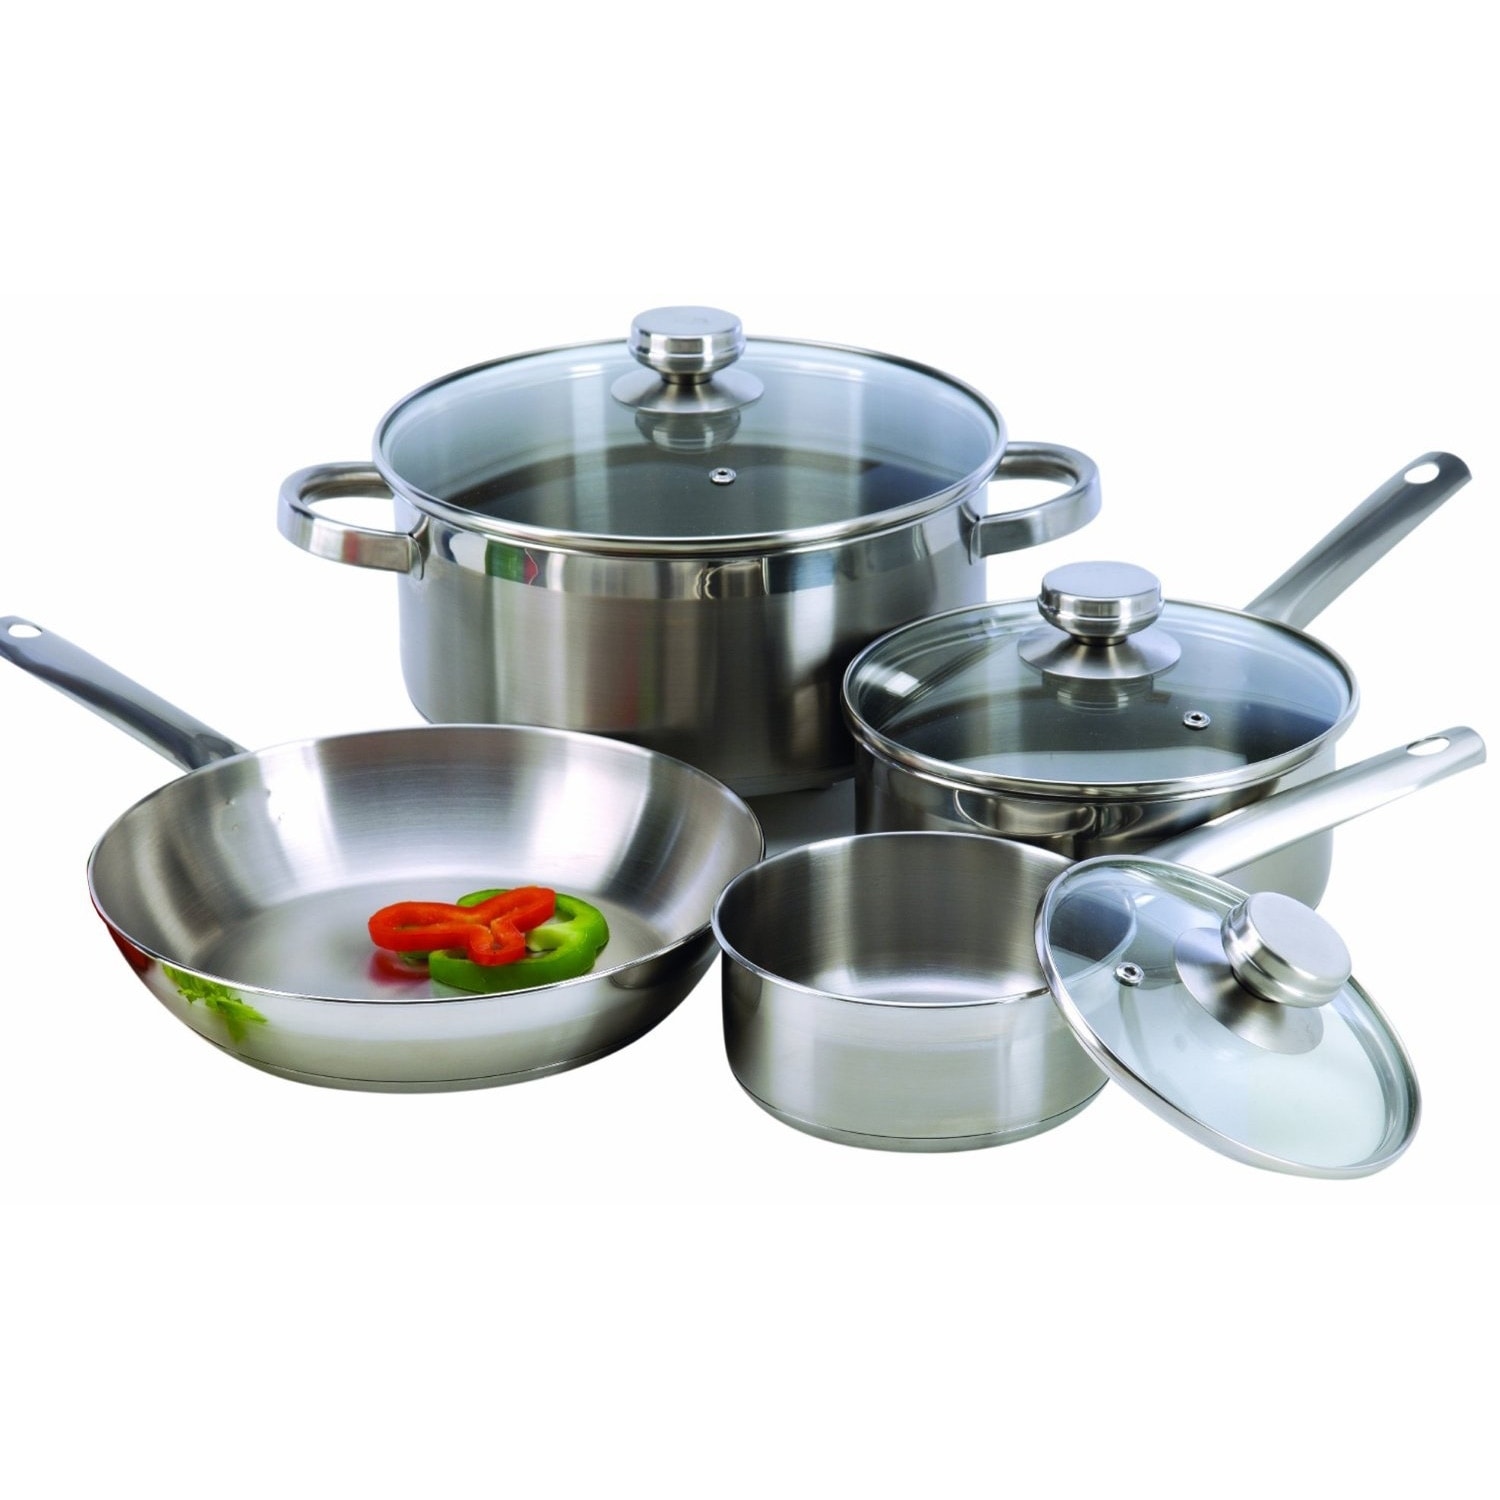 https://ak1.ostkcdn.com/images/products/is/images/direct/76b8f7203cf71617c968682a9c99475683c753ff/7-Piece-Cookware-Set-Constructed-in-18-10-Stainless-Steel.jpg